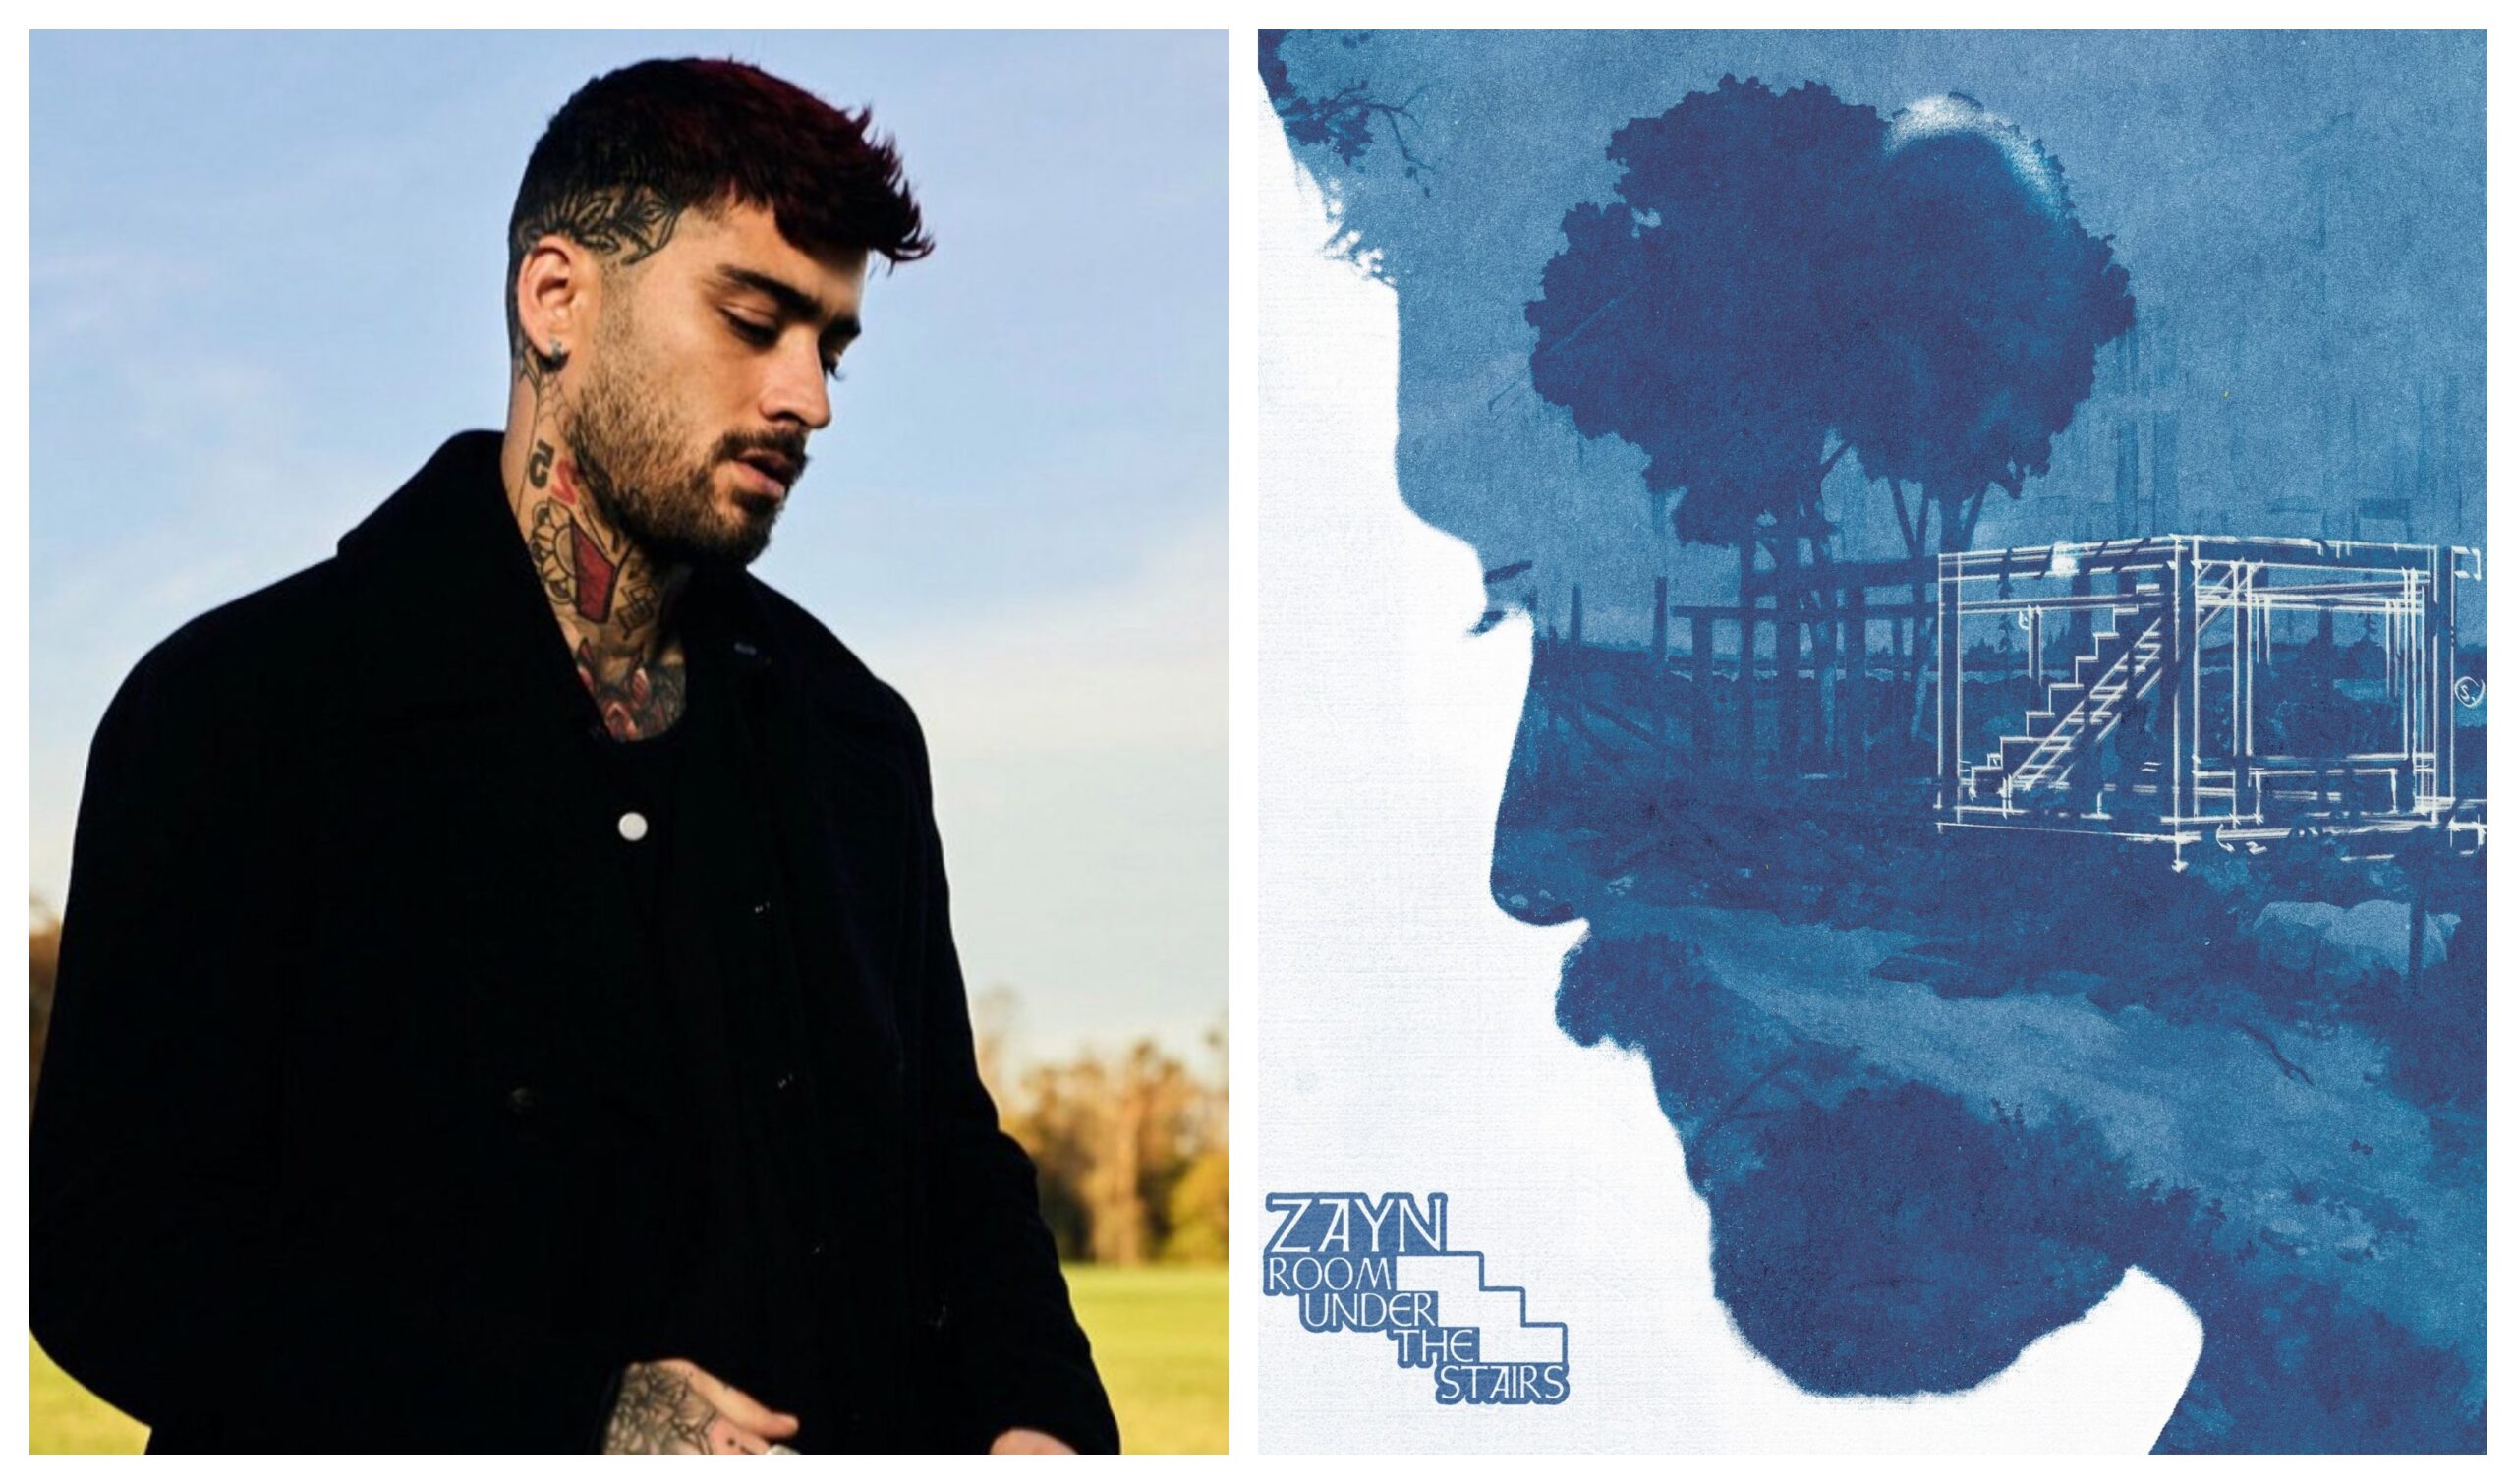 Zayn Malik Releases ‘Z-Sides’ To His ‘Room Under The Stairs’ Album [Stream]